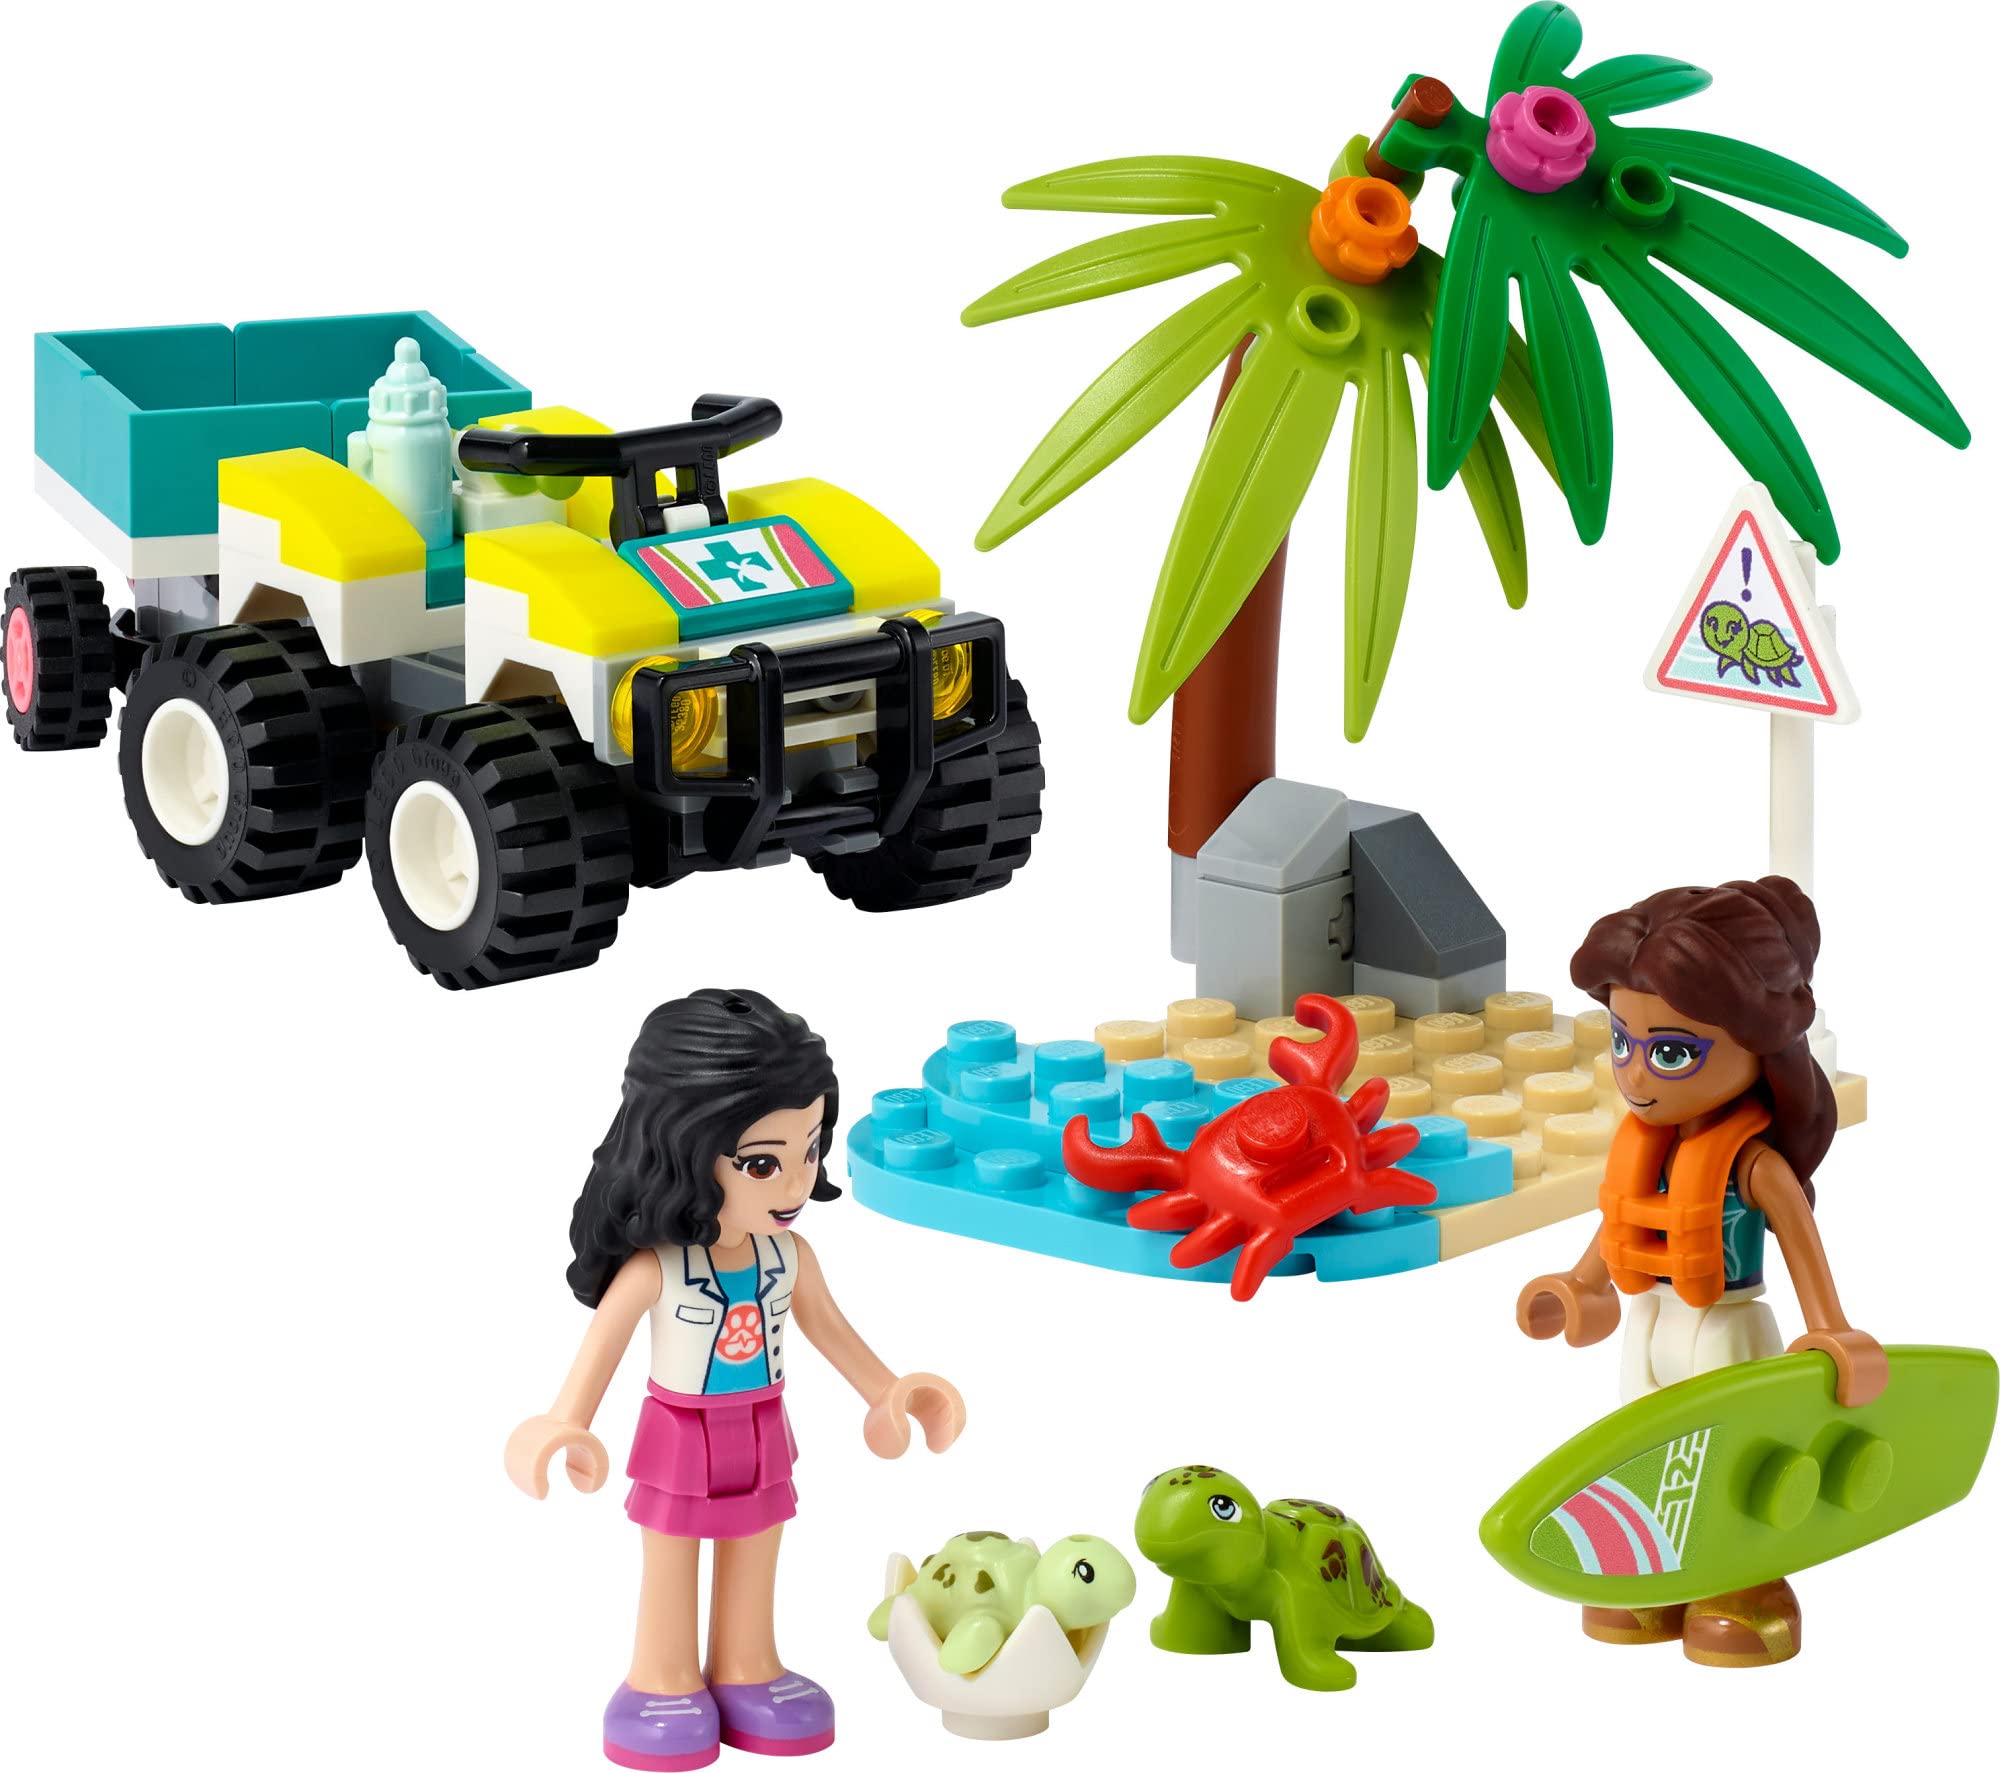 LEGO Friends Turtle Protection Vehicle 41697 Building Toy Set for Kids, Girls, and Boys Ages 6+ (90 Pieces)